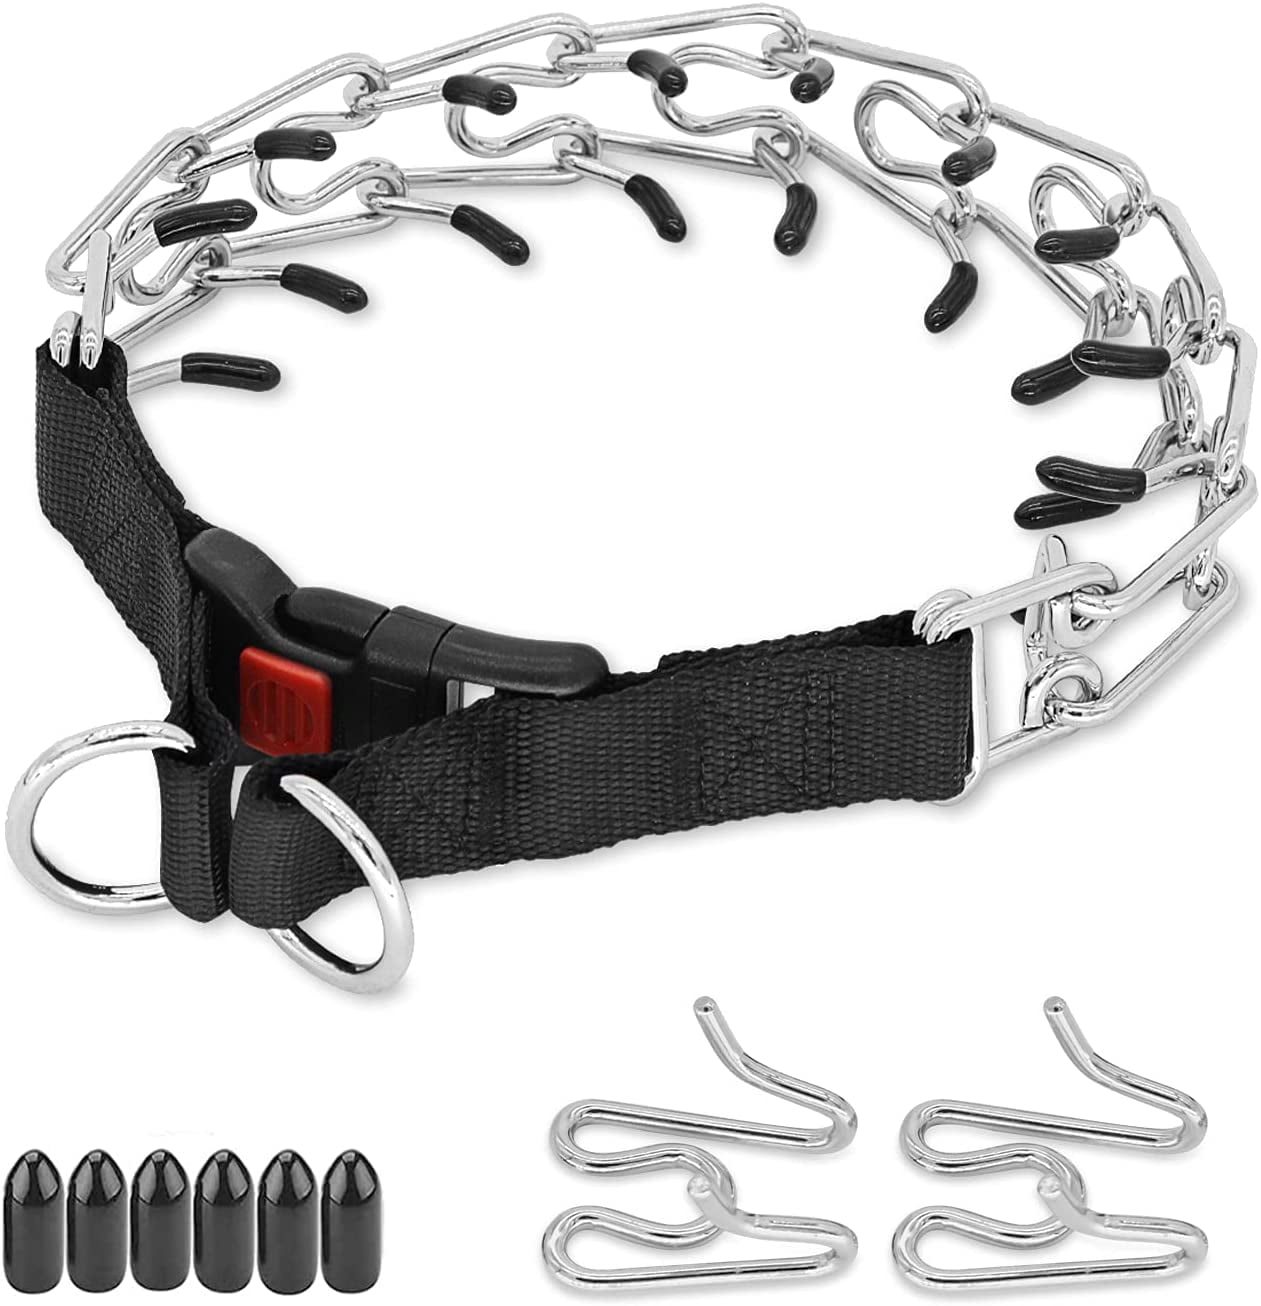 No Pull Adjustable Dog Choke Training Collar Stainless Steel Dog Prong Collar with Rubber Tips Dog Pinch Collar with Quick Release Carabiner for Small Medium Large Dogs Prong Collar for Large Dogs 